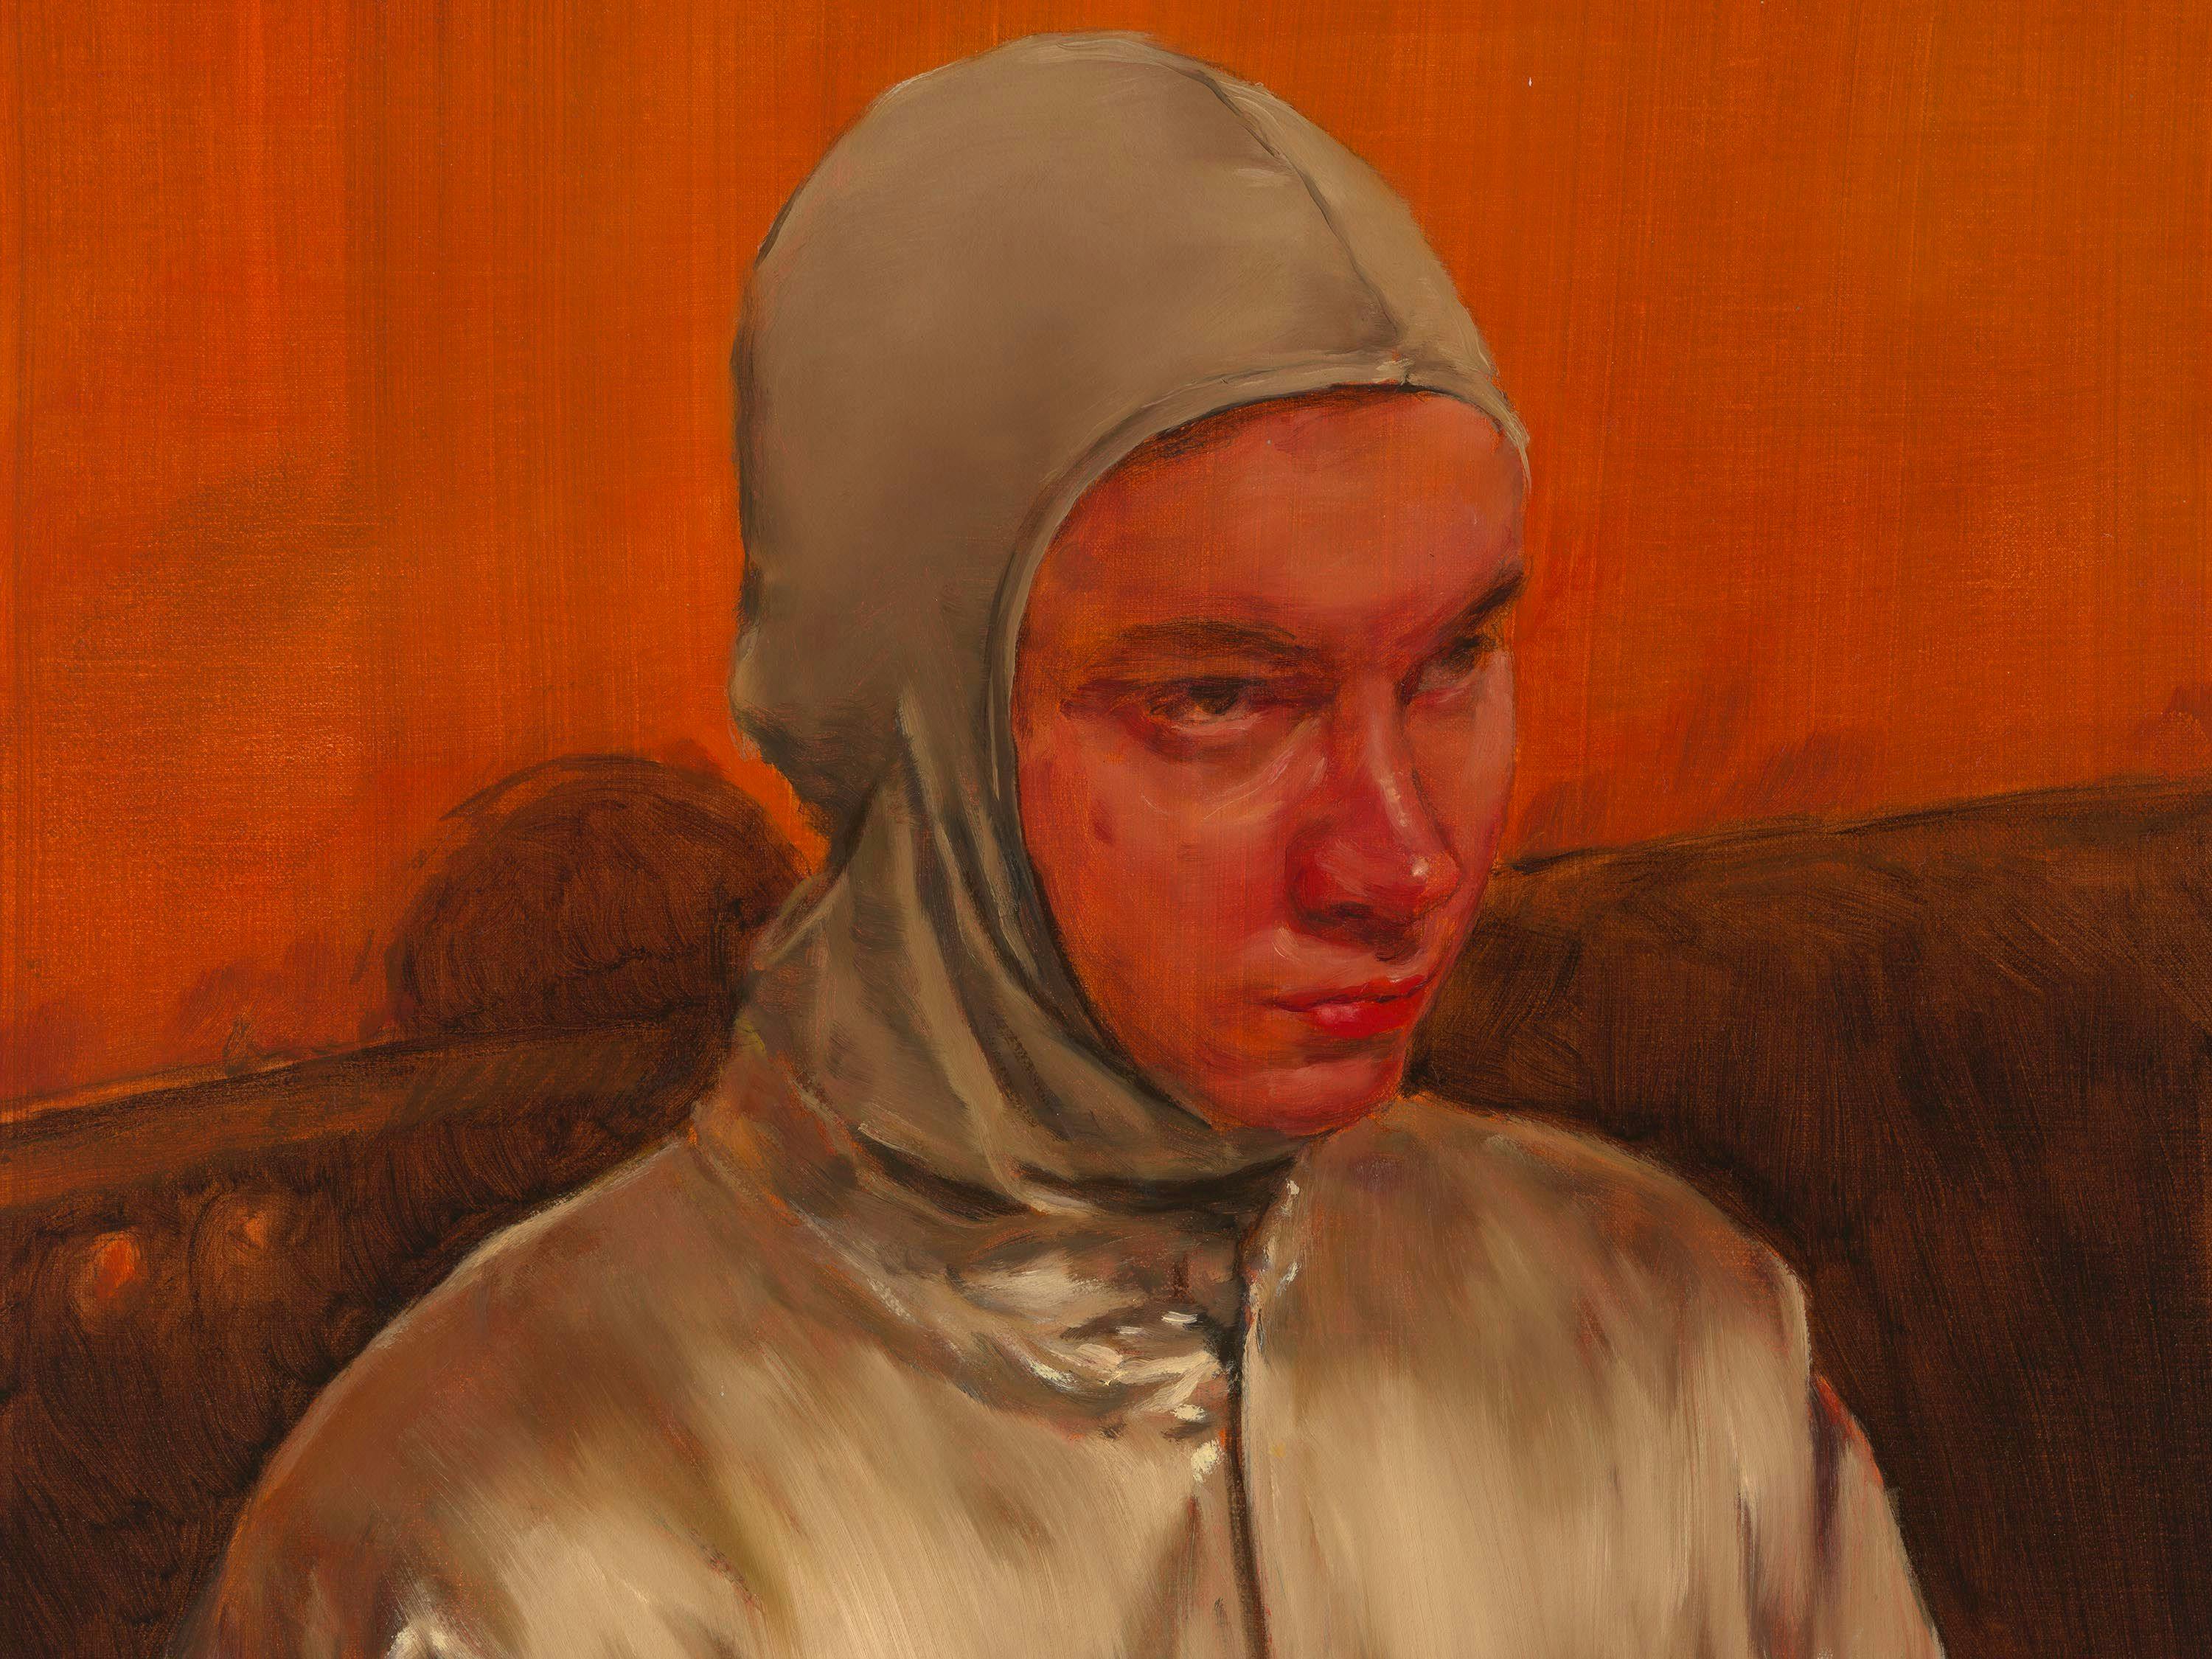 A detail from a painting by Michaël Borremans, titled The Spaceman, dated 2023.